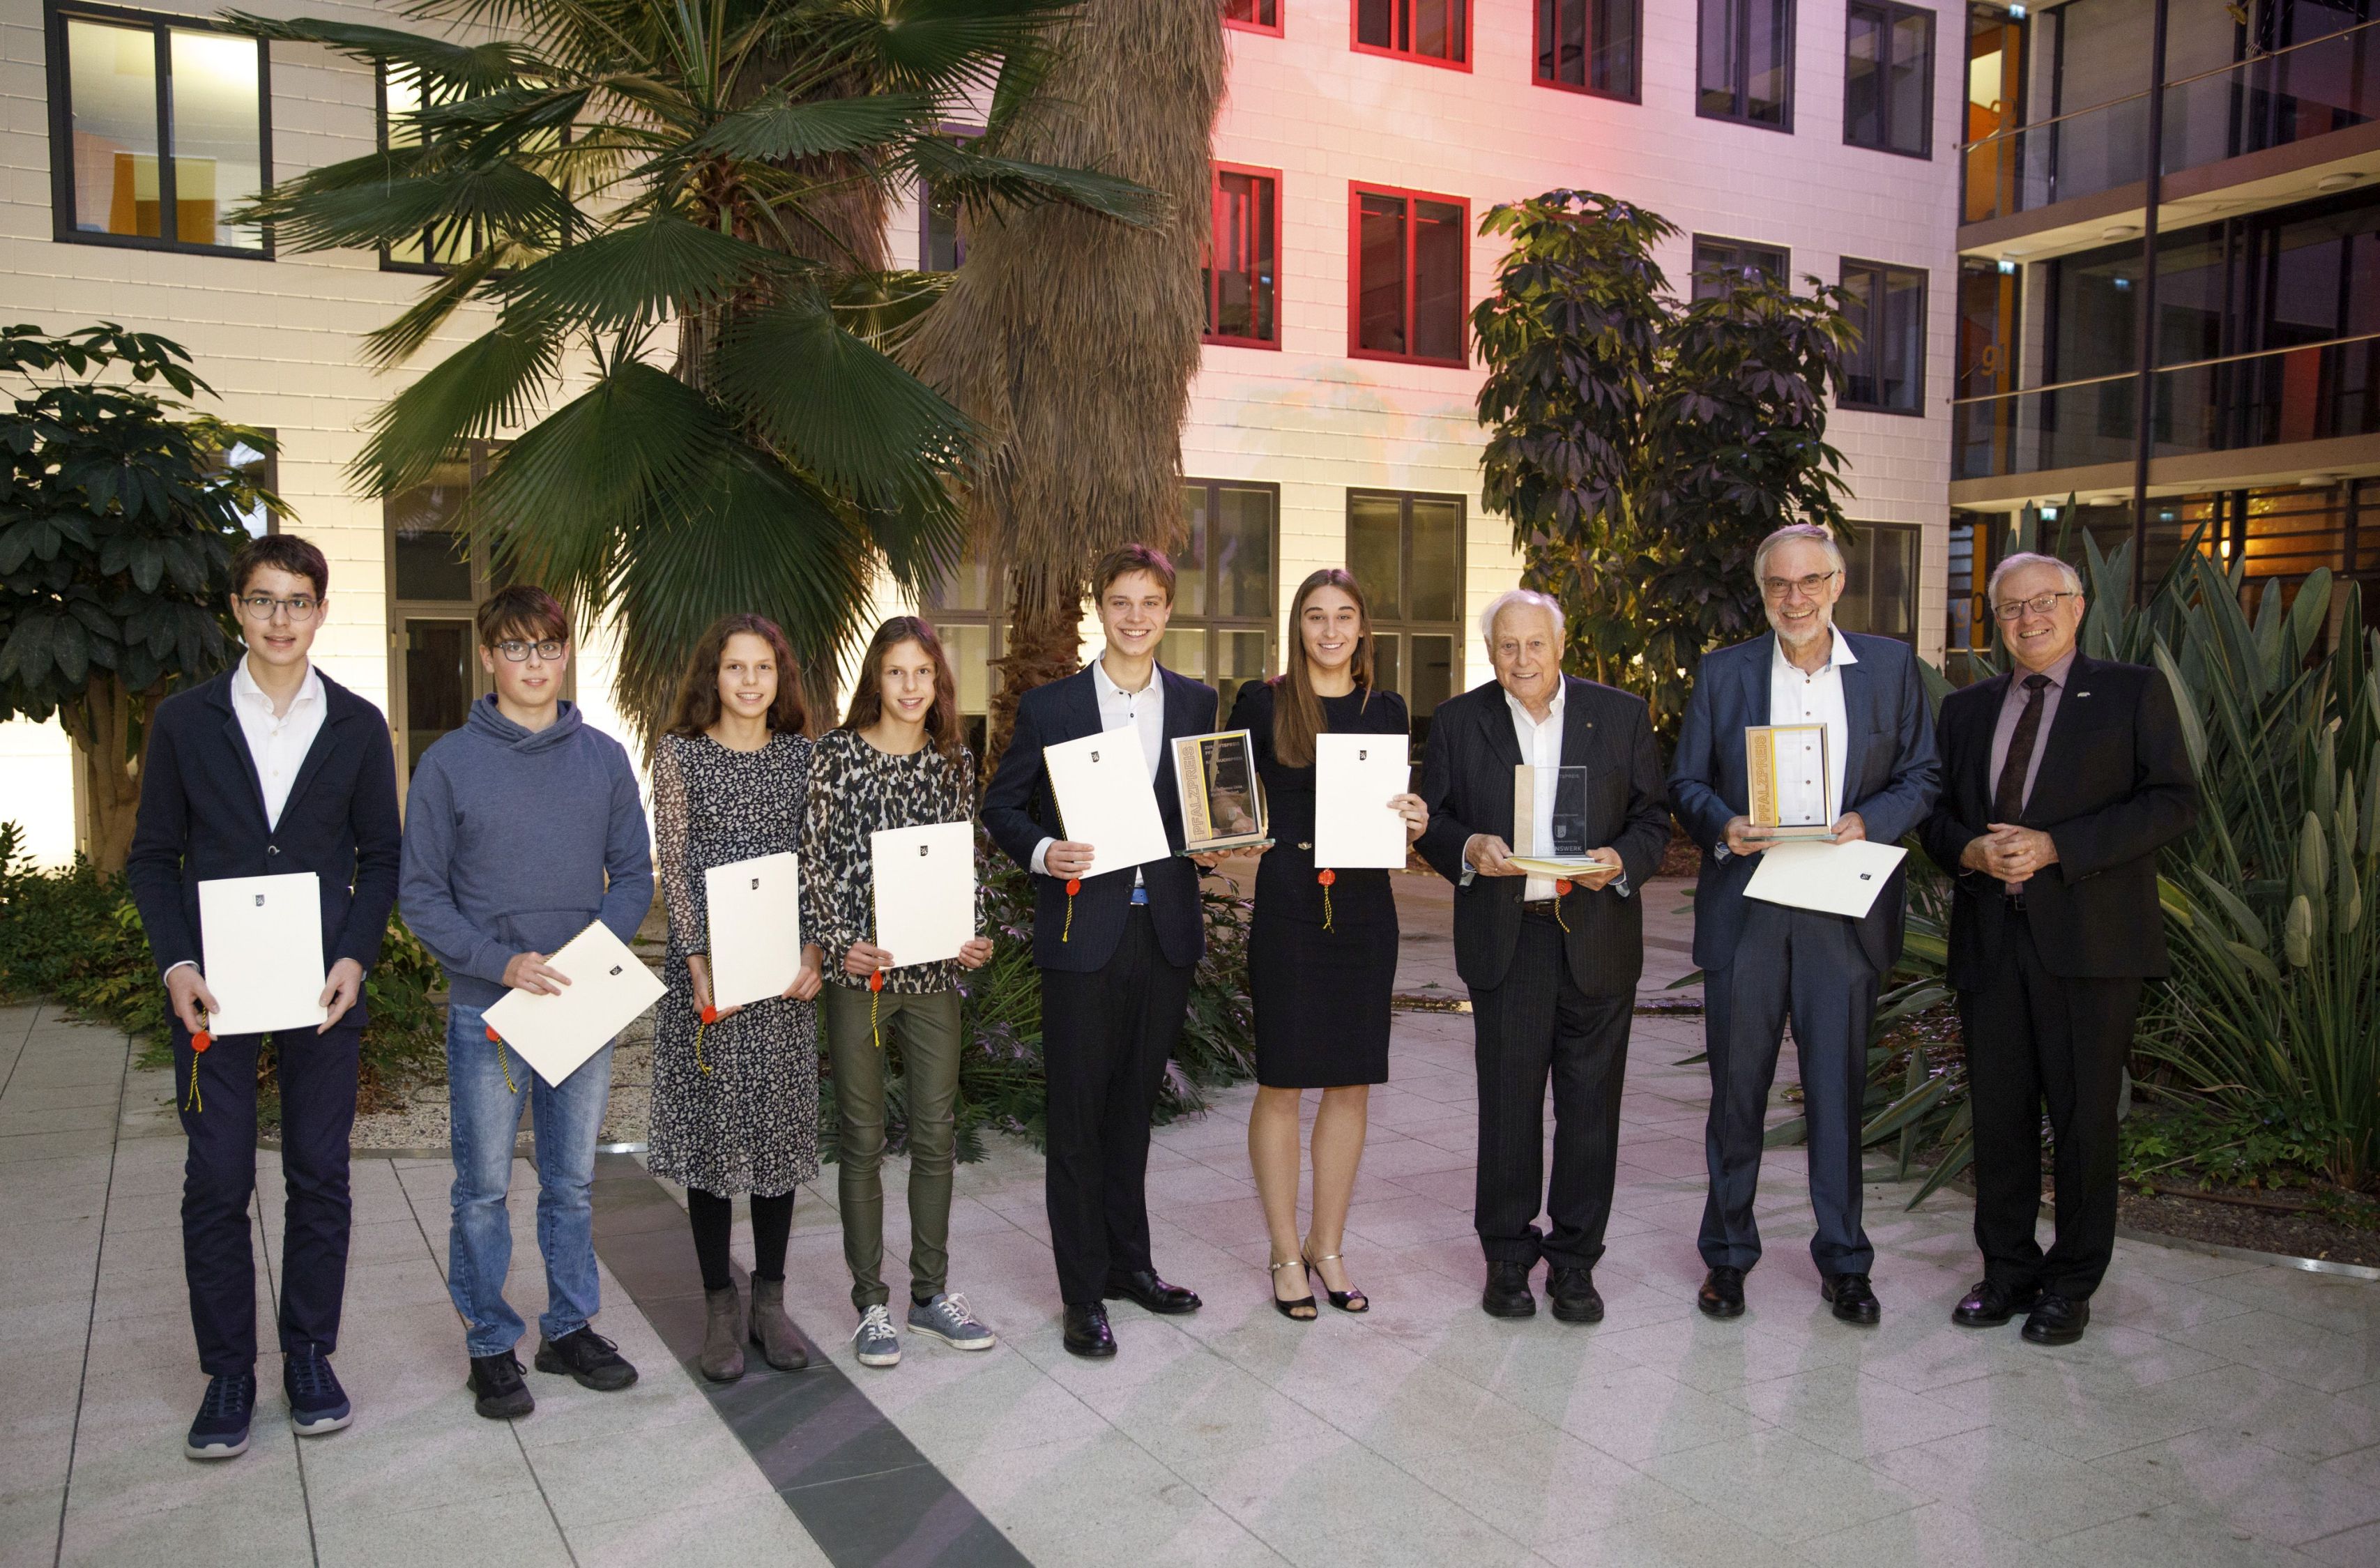 Presentation of the Future Awards of the Pfalz District Association: The winners